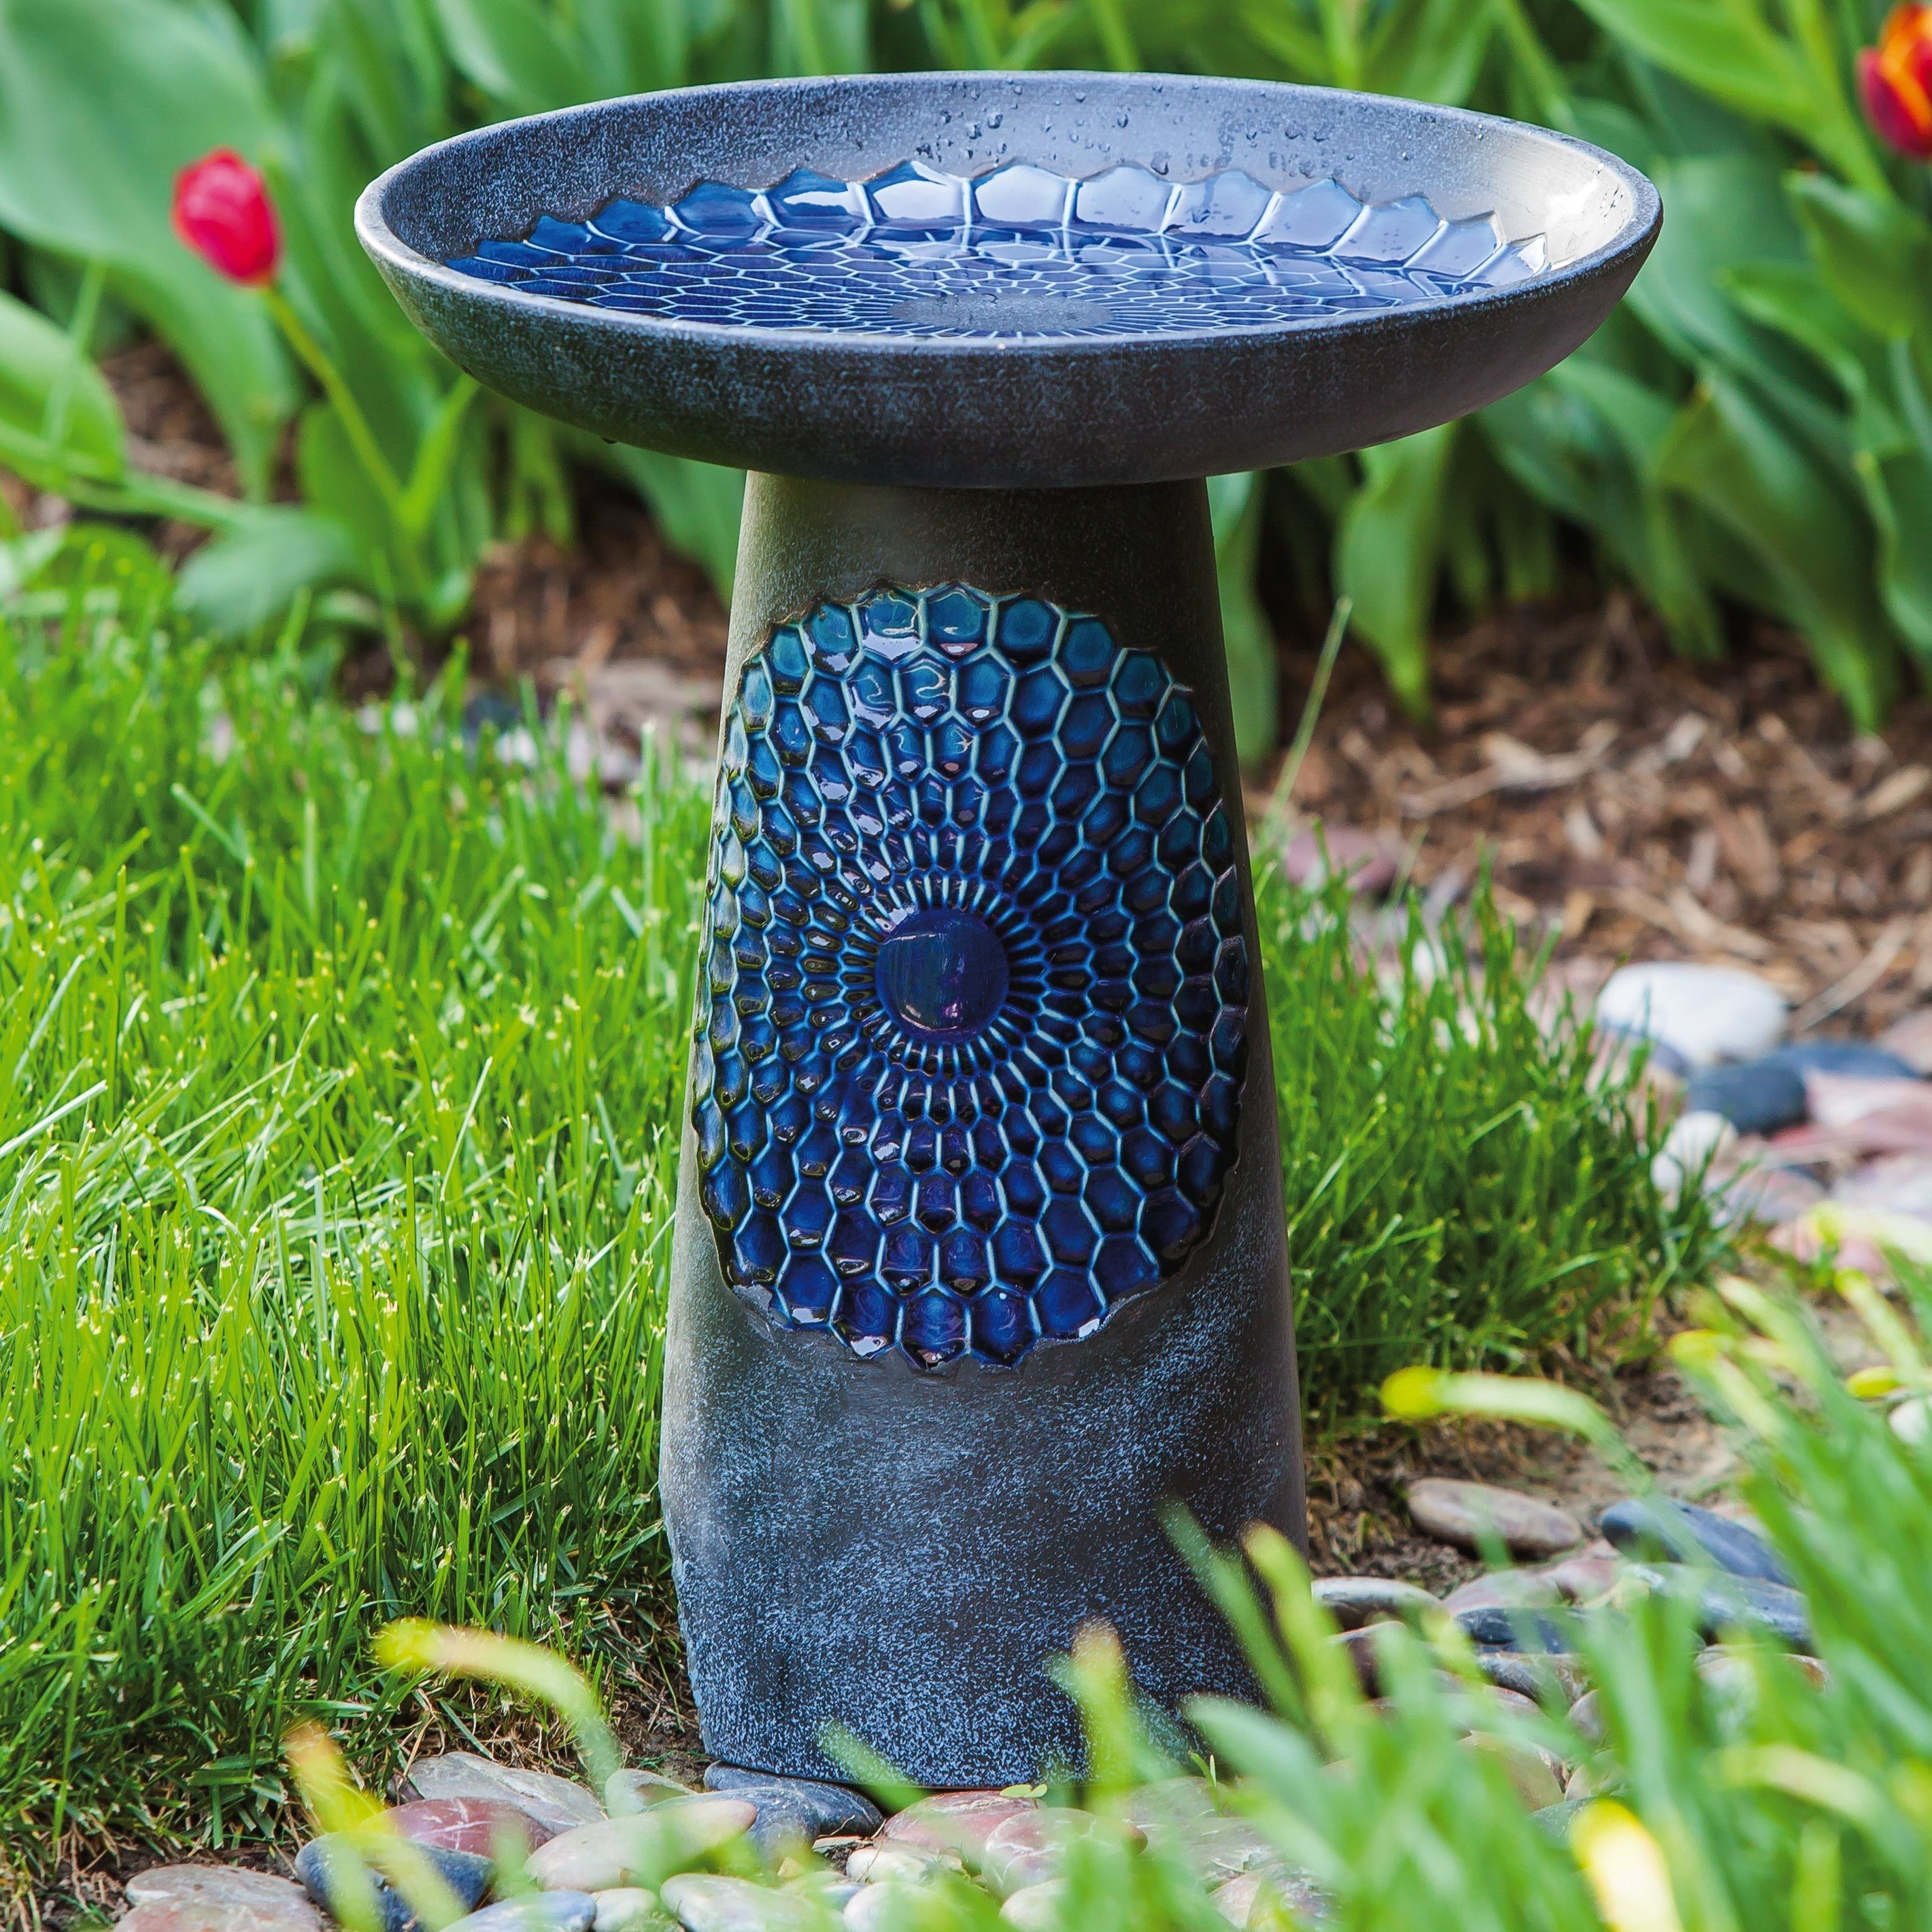 Shop Wayfair For All Bird Baths To Match Every Style And Budget Pertaining To Wayfair Landscape Lighting For Mini Garden (View 14 of 15)